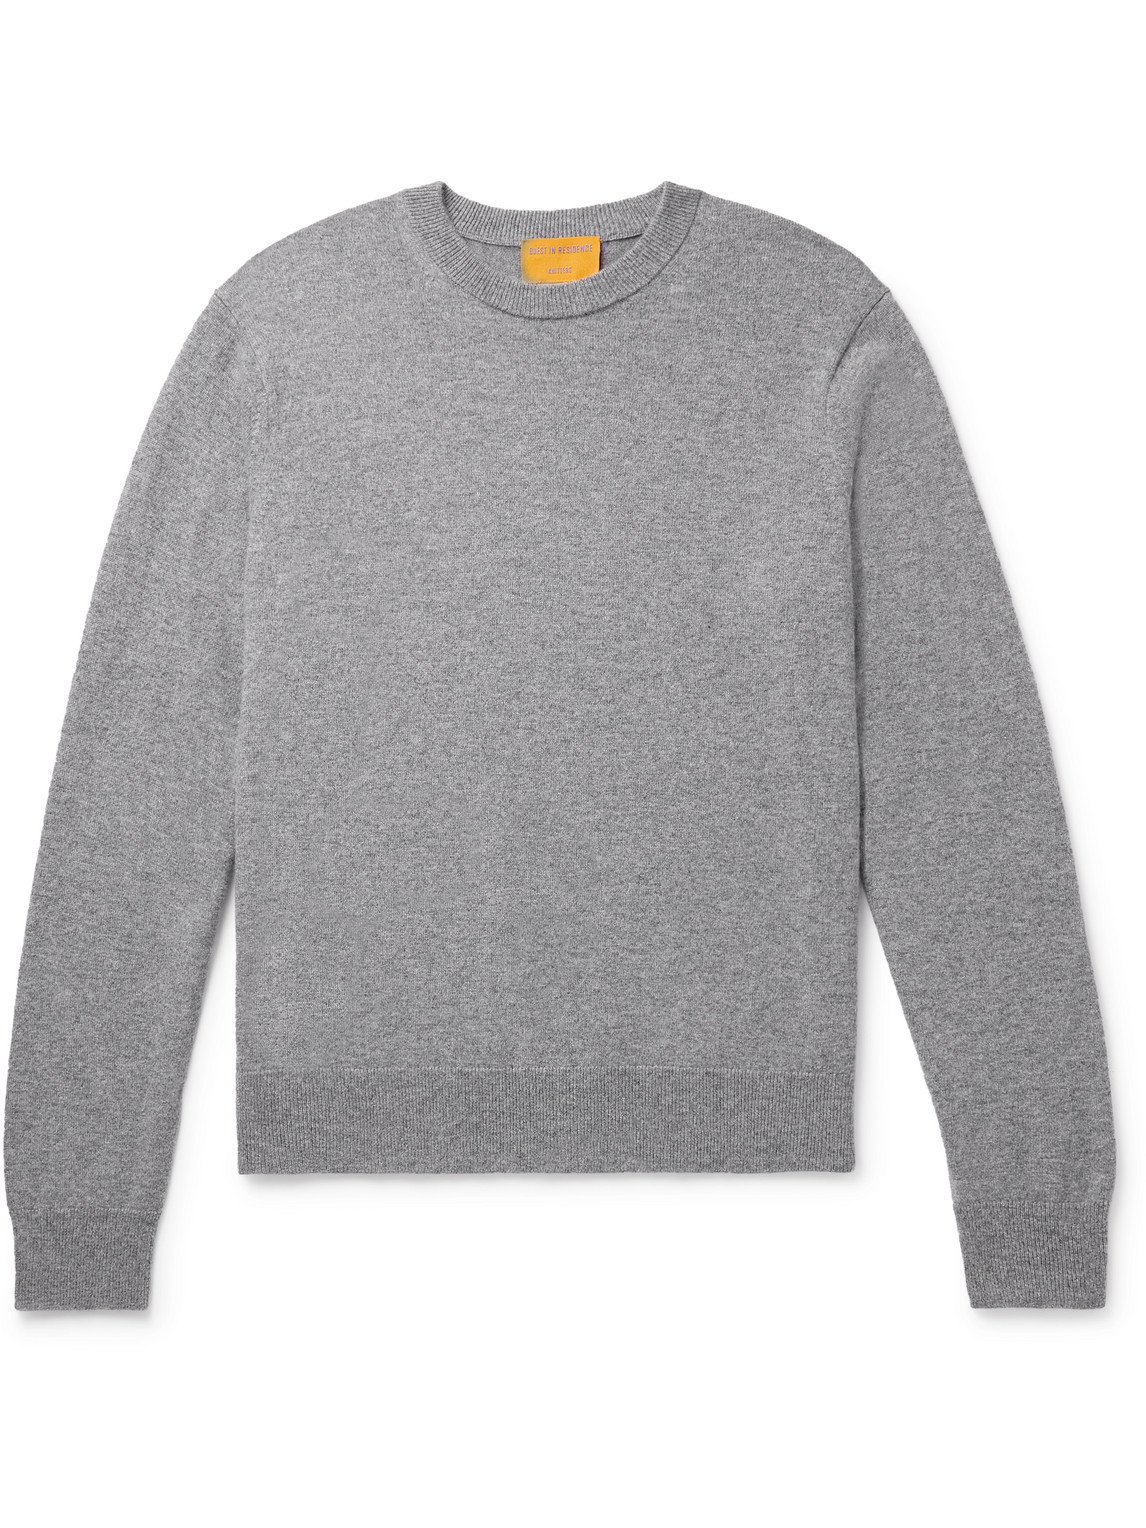 Guest In Residence True Cashmere Sweater In Gray